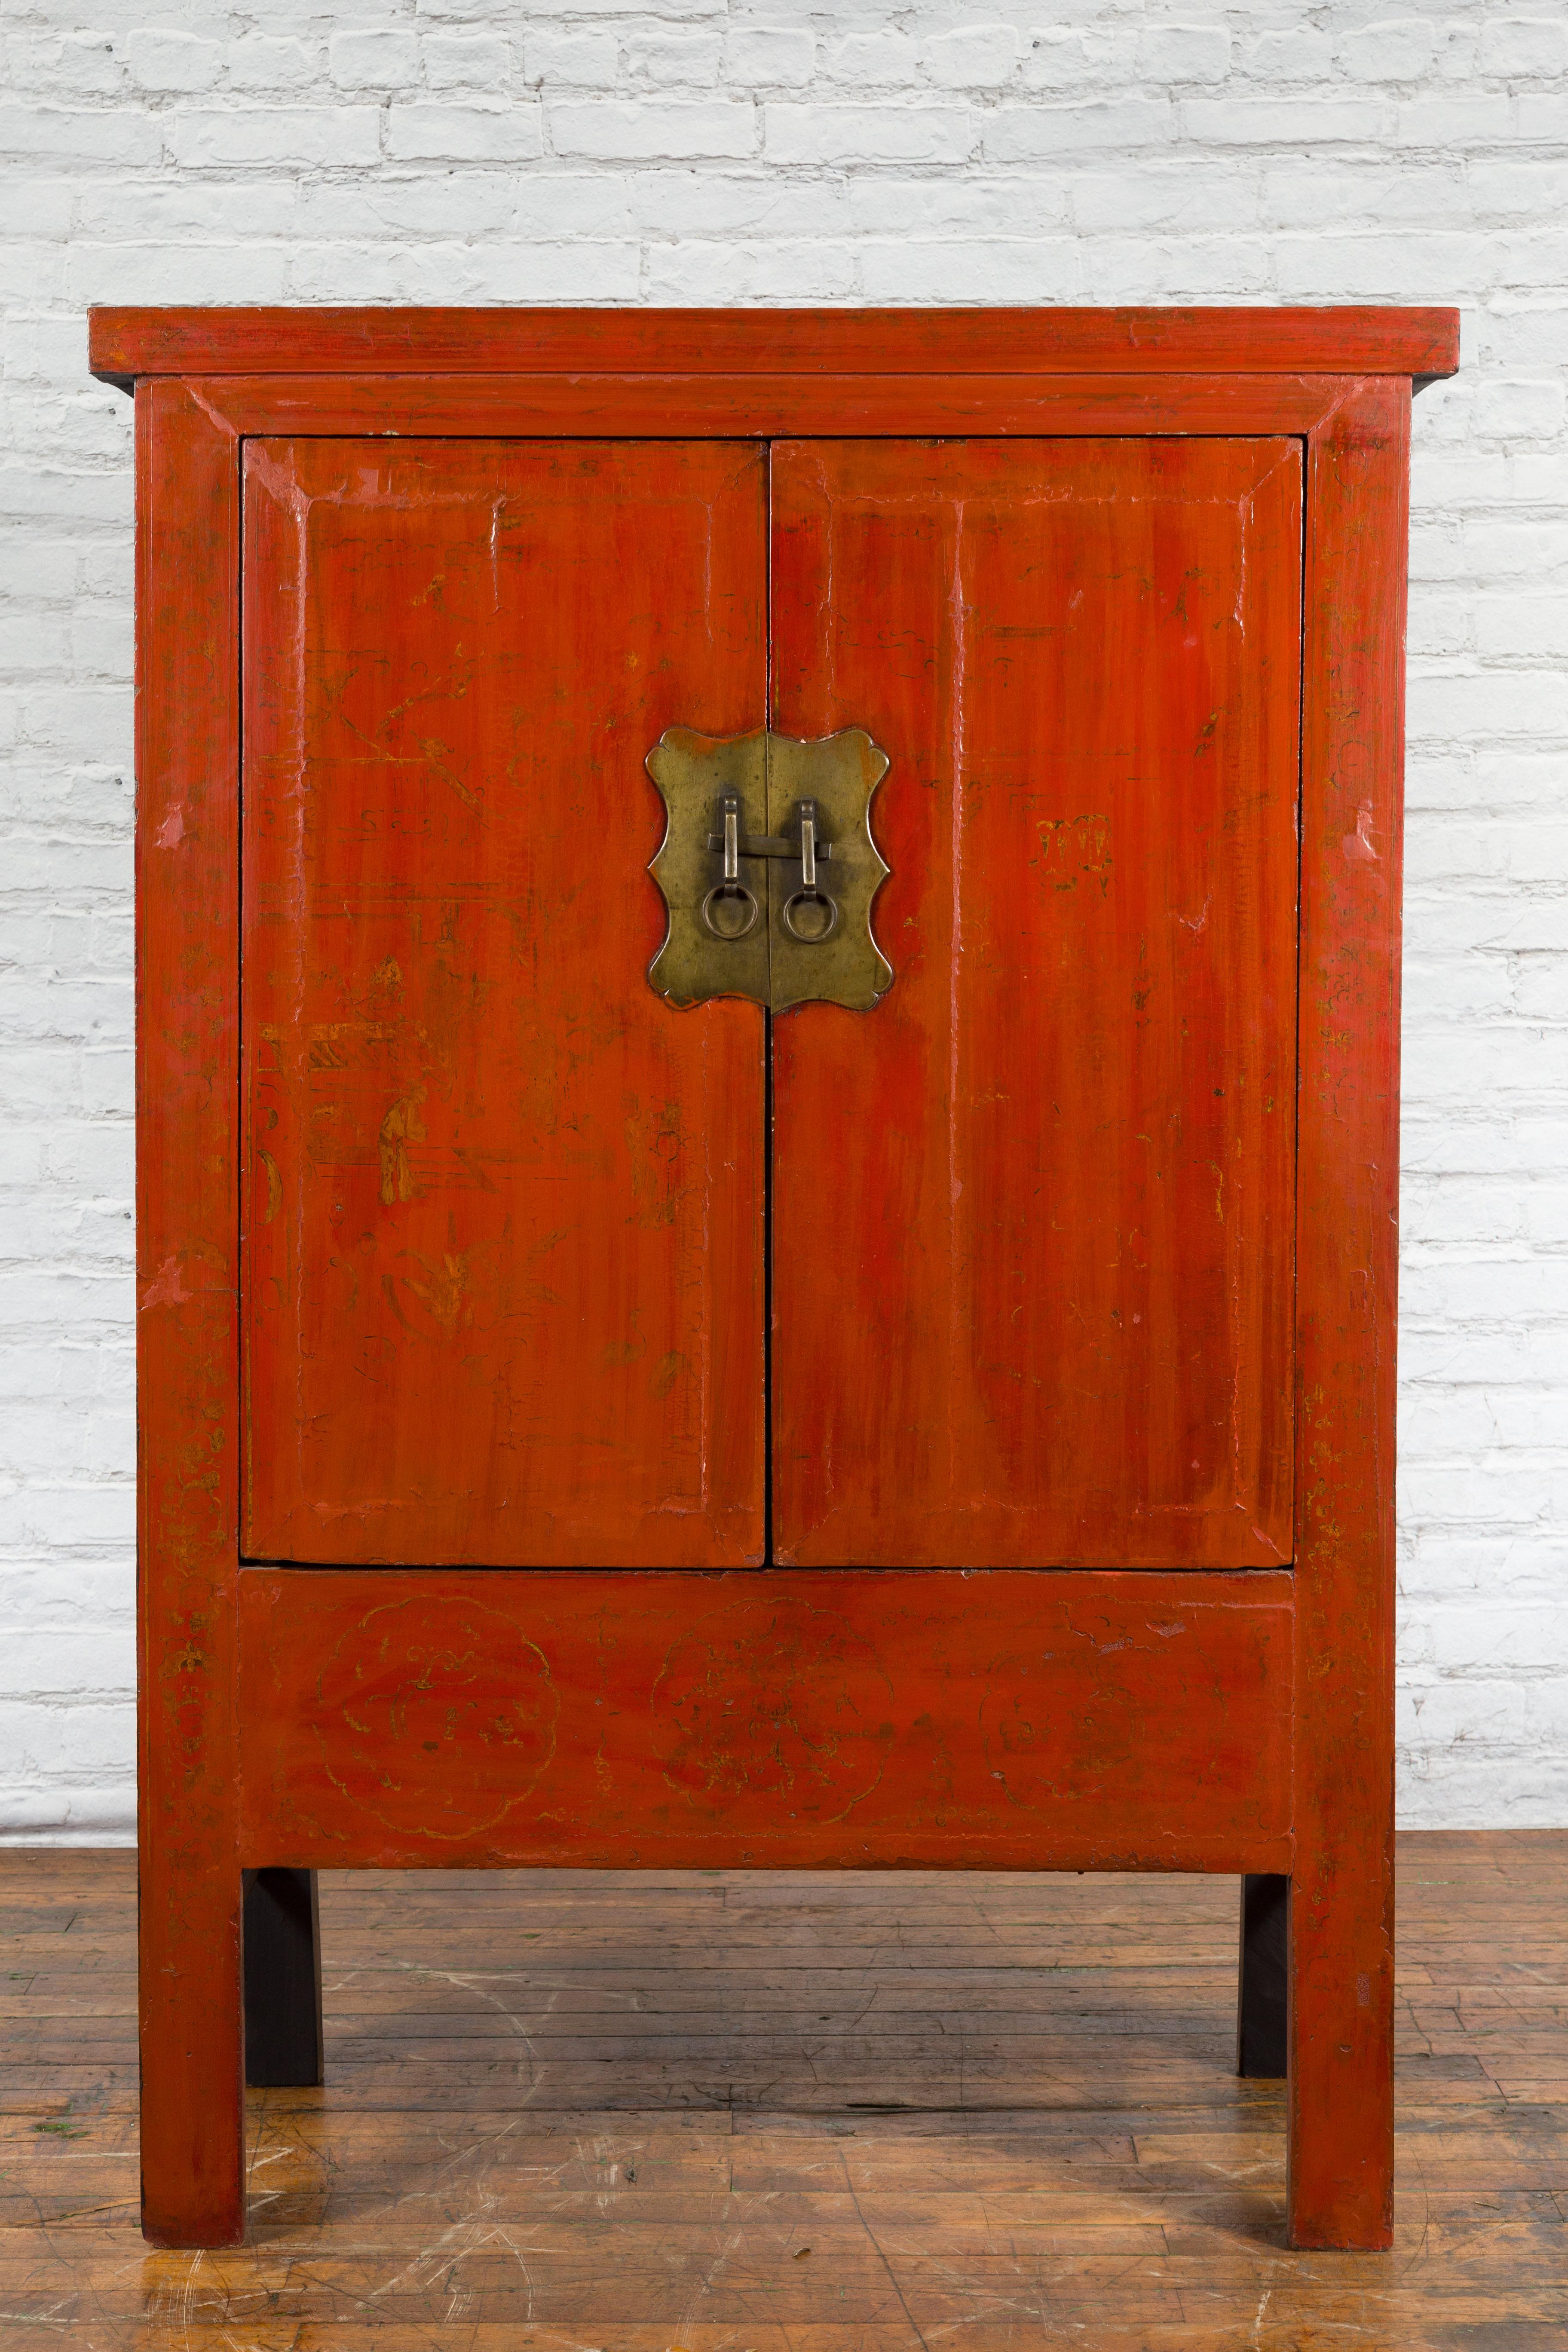 A Chinese Qing Dynasty period red lacquer cabinet from the 19th century with faint hand-painted décor and brass hardware. Created in China during the Qing Dynasty period in the 19th century, this cabinet features a linear silhouette perfectly